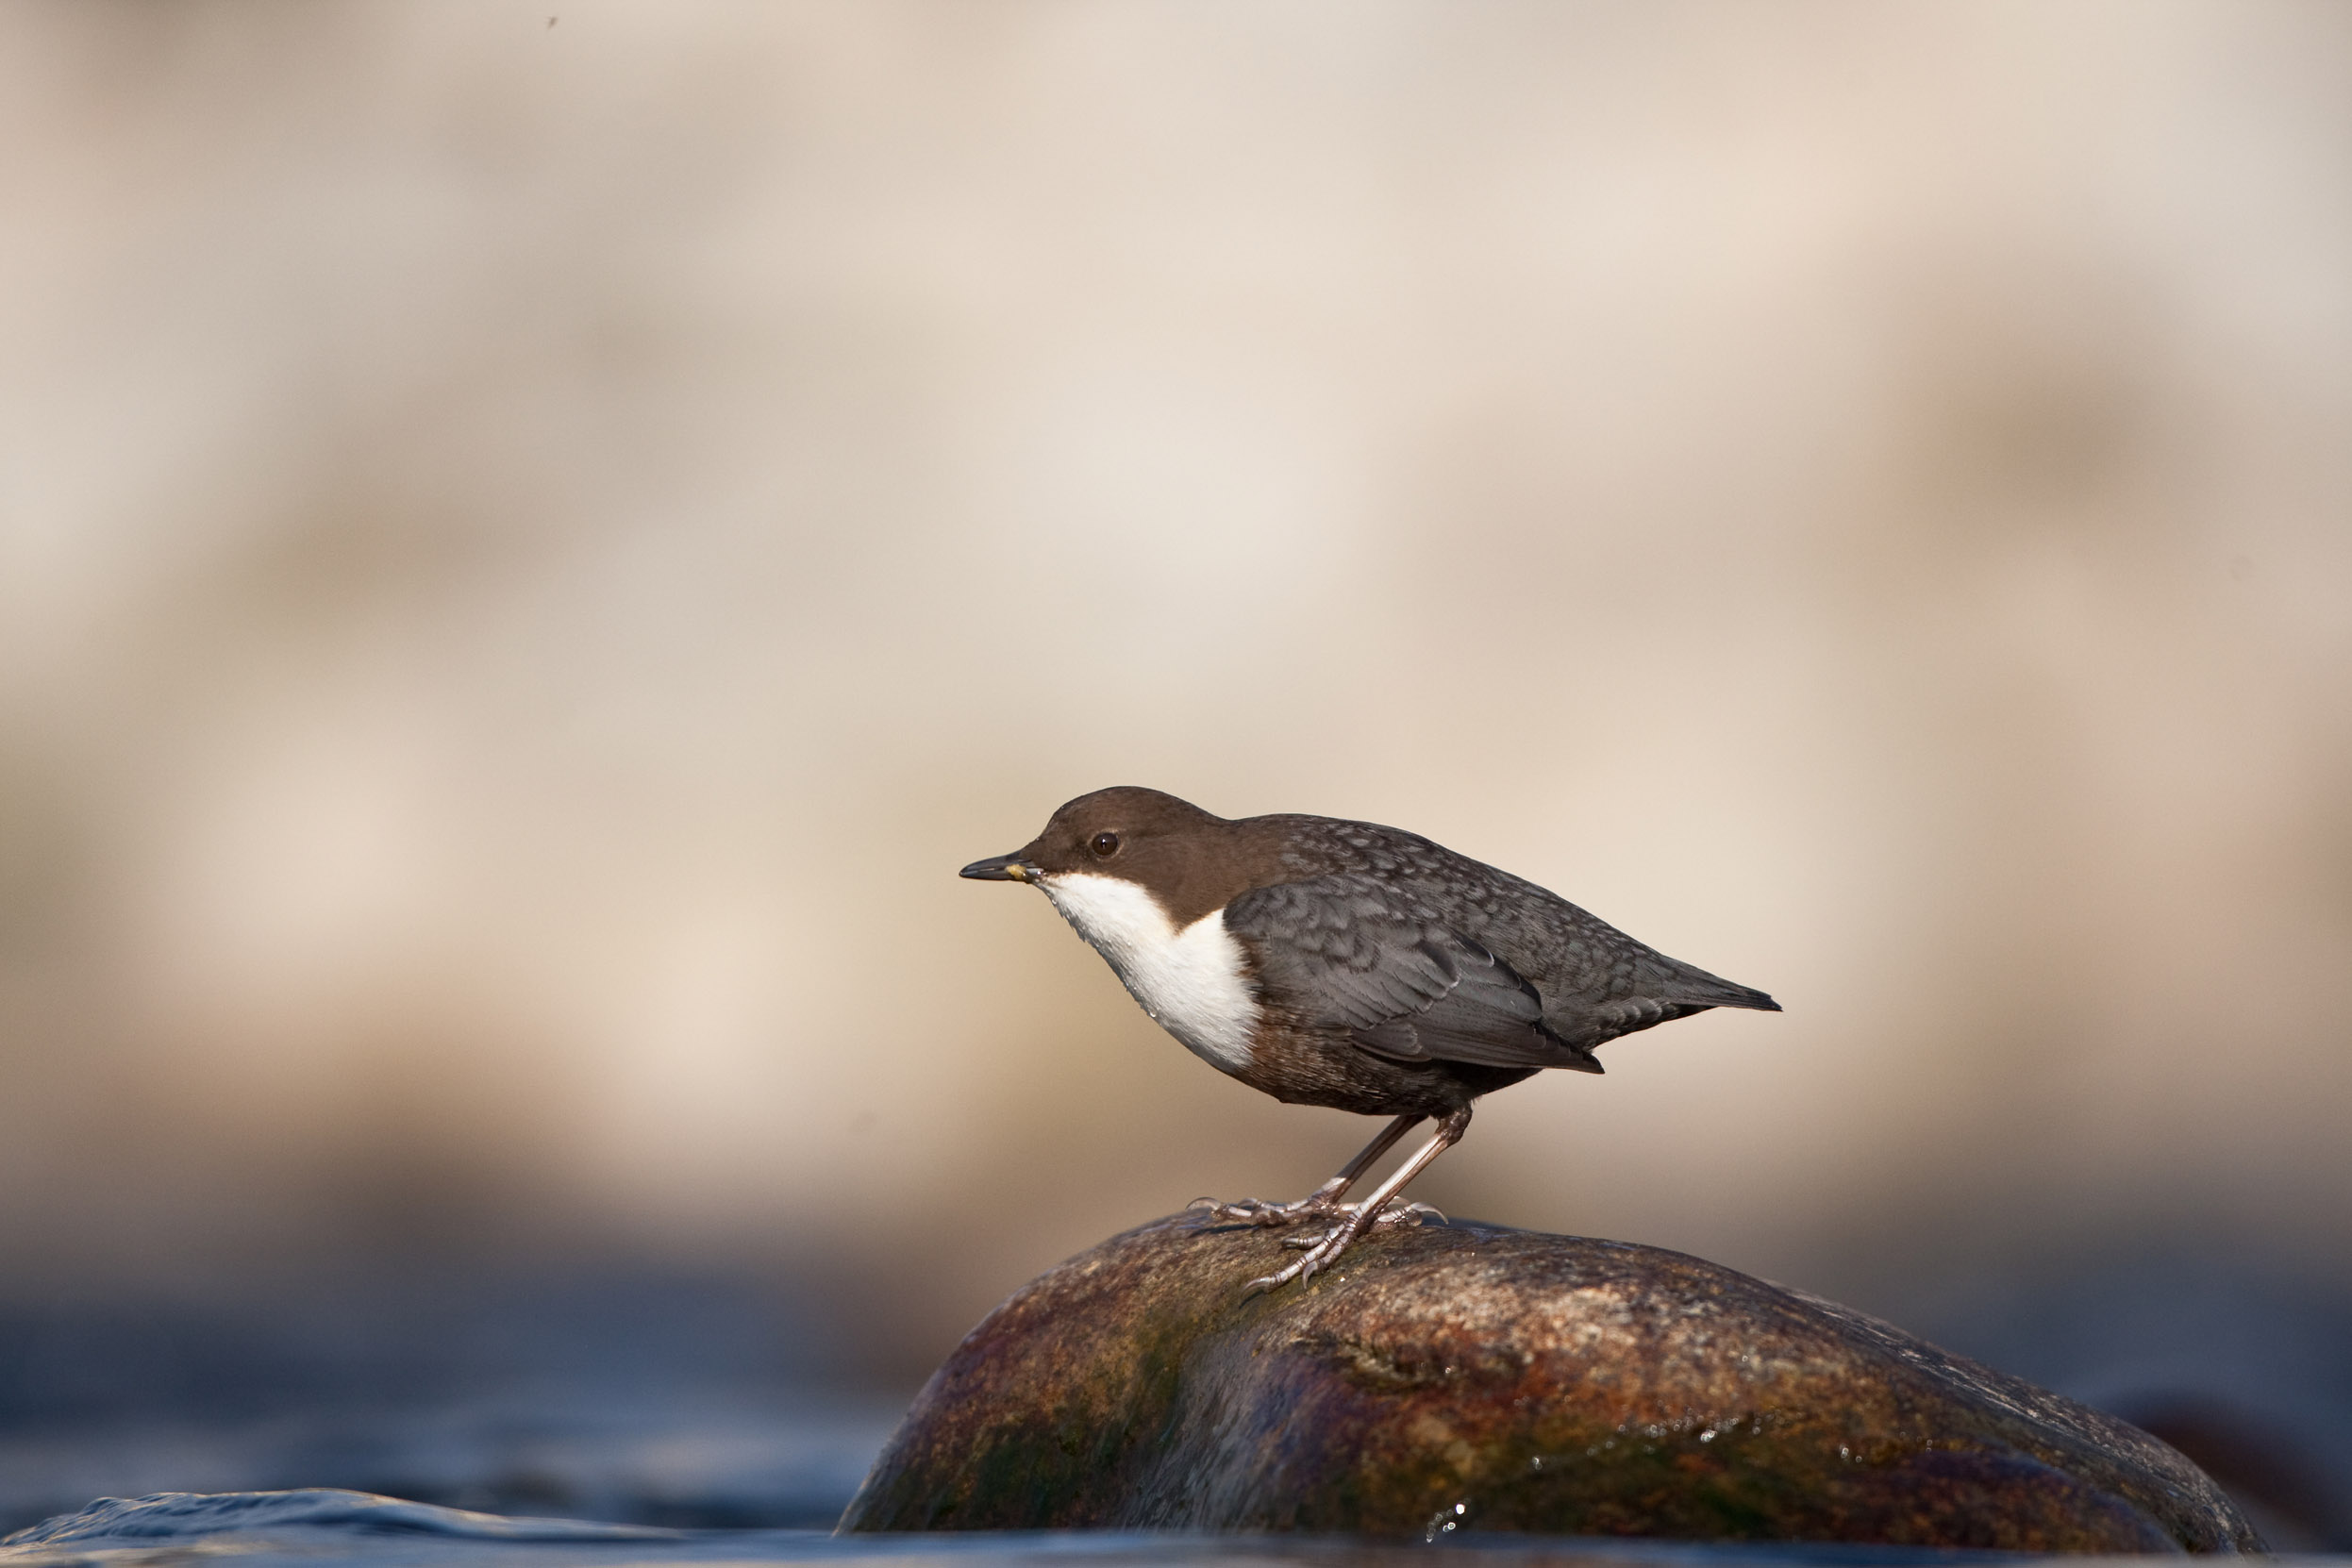 A lone Dipper perched on a small rock in a body of water.